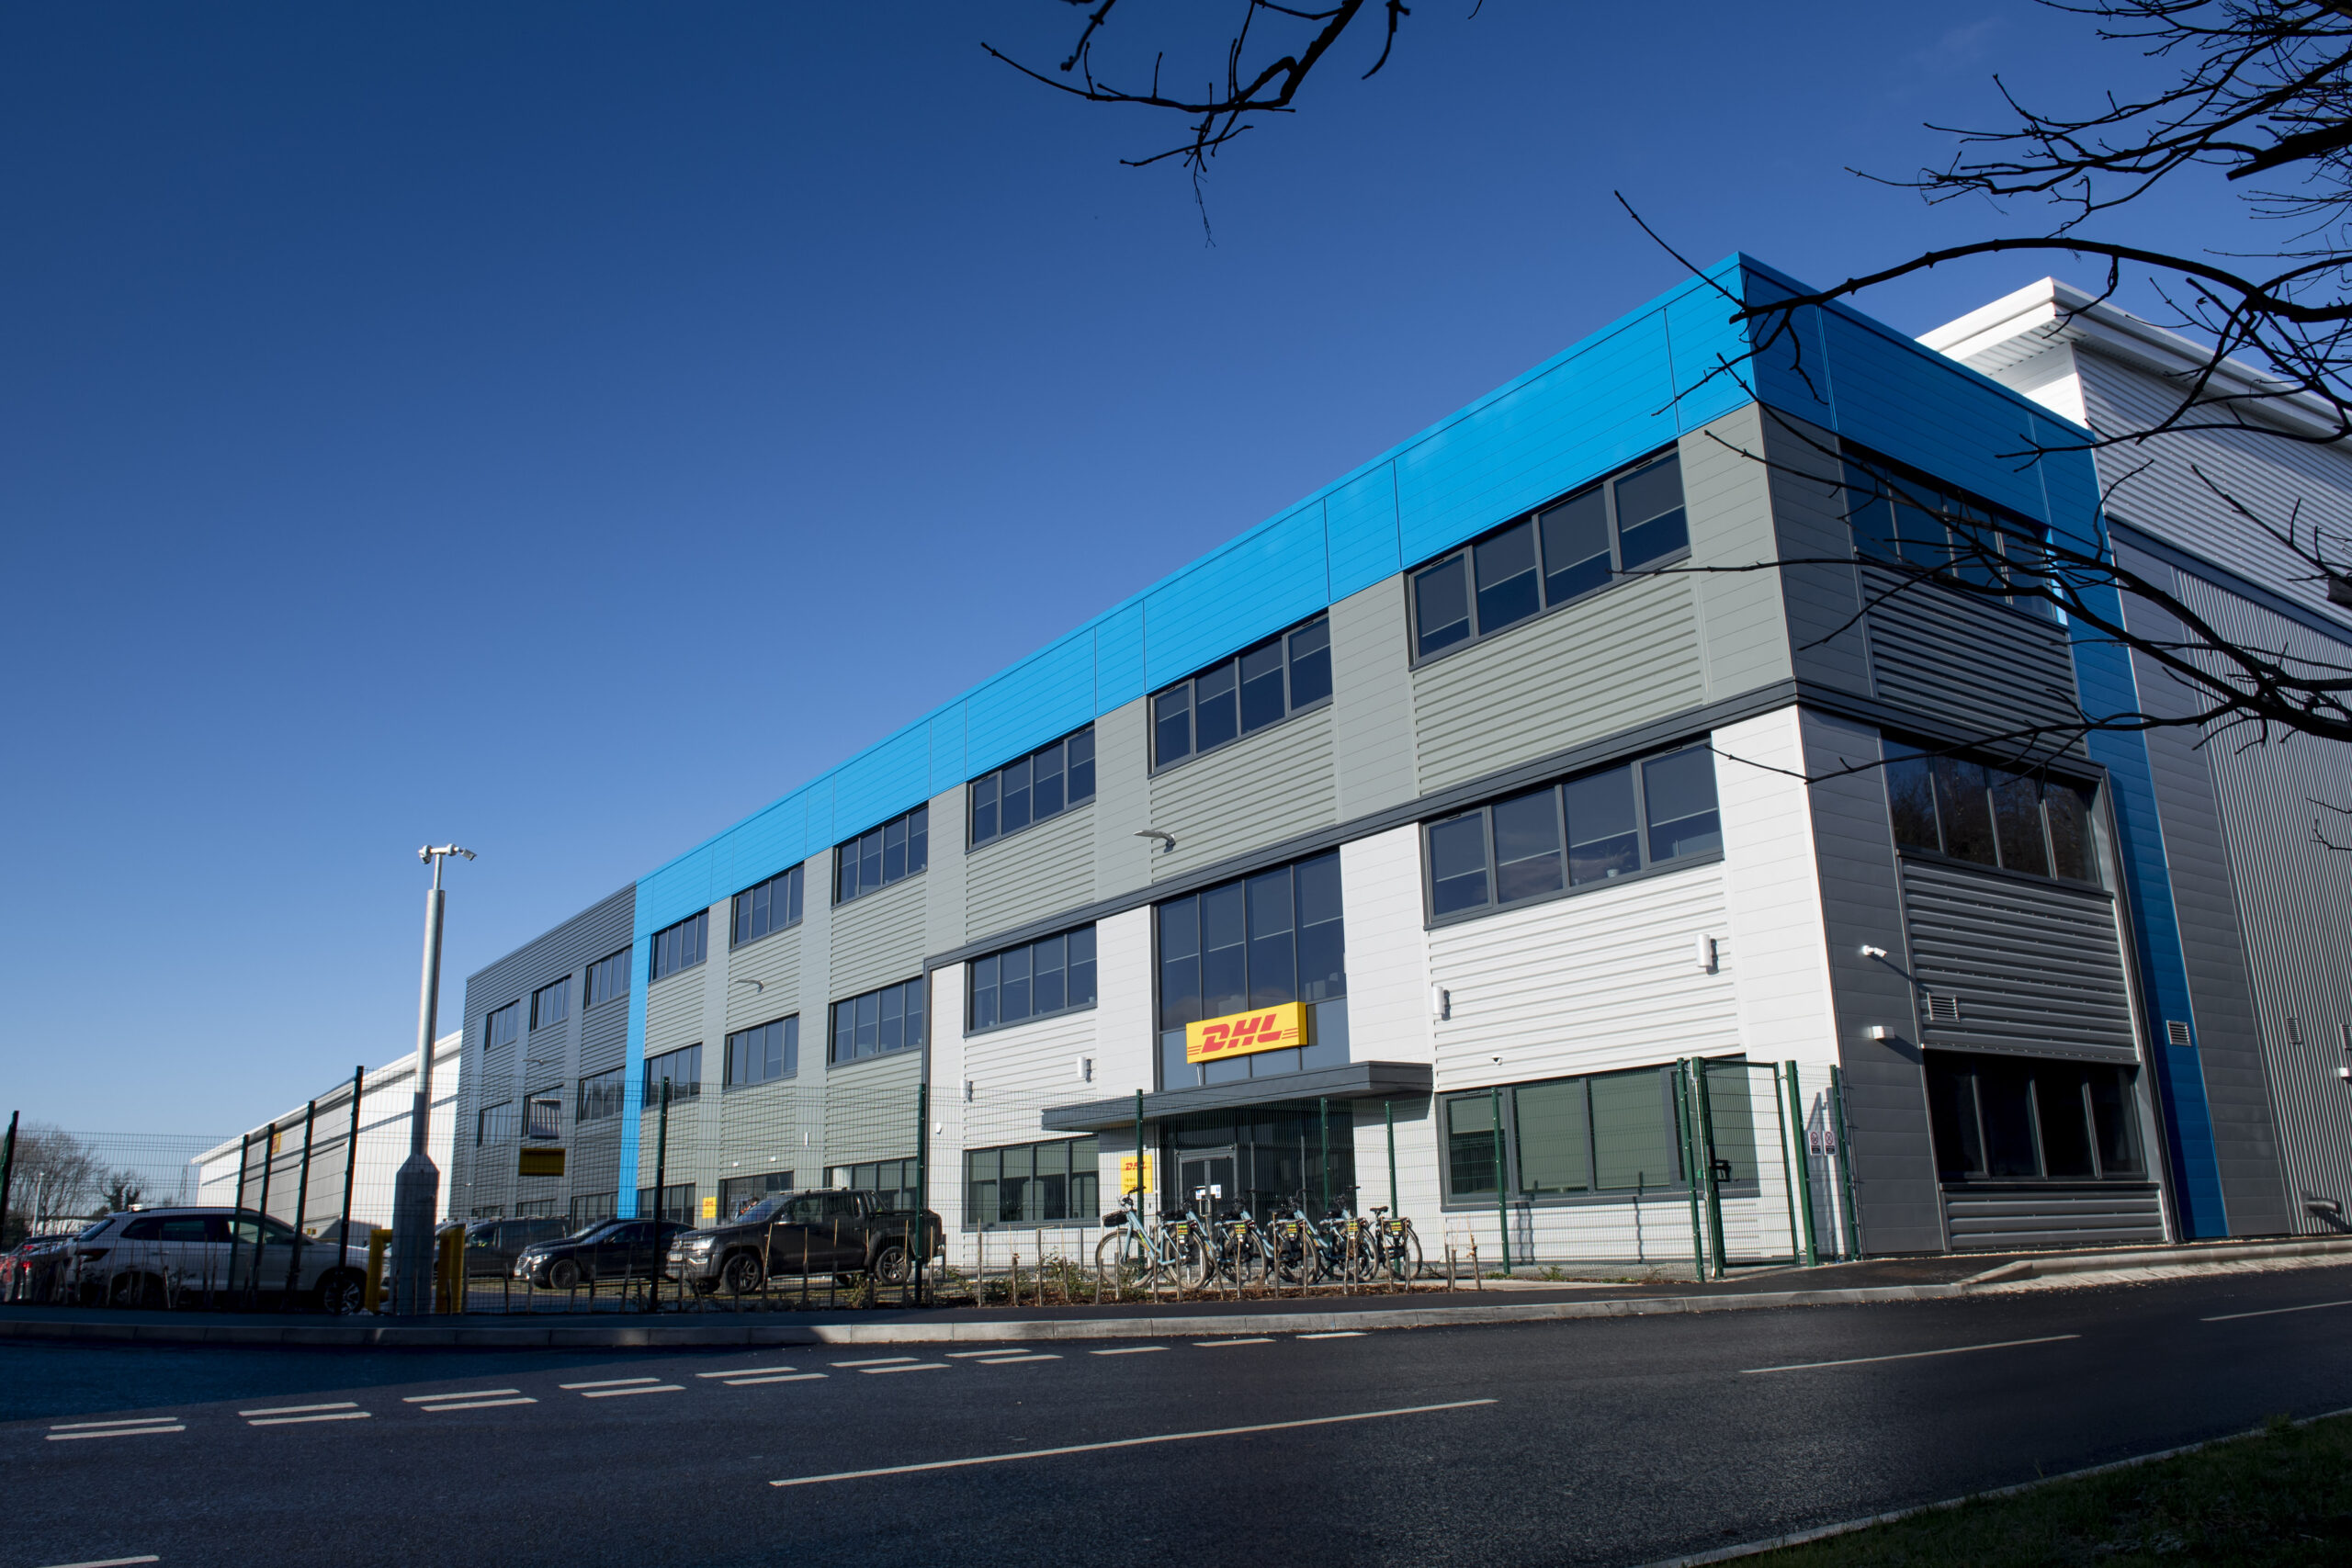 DHL opens operationally carbon neutral facility in Coventry